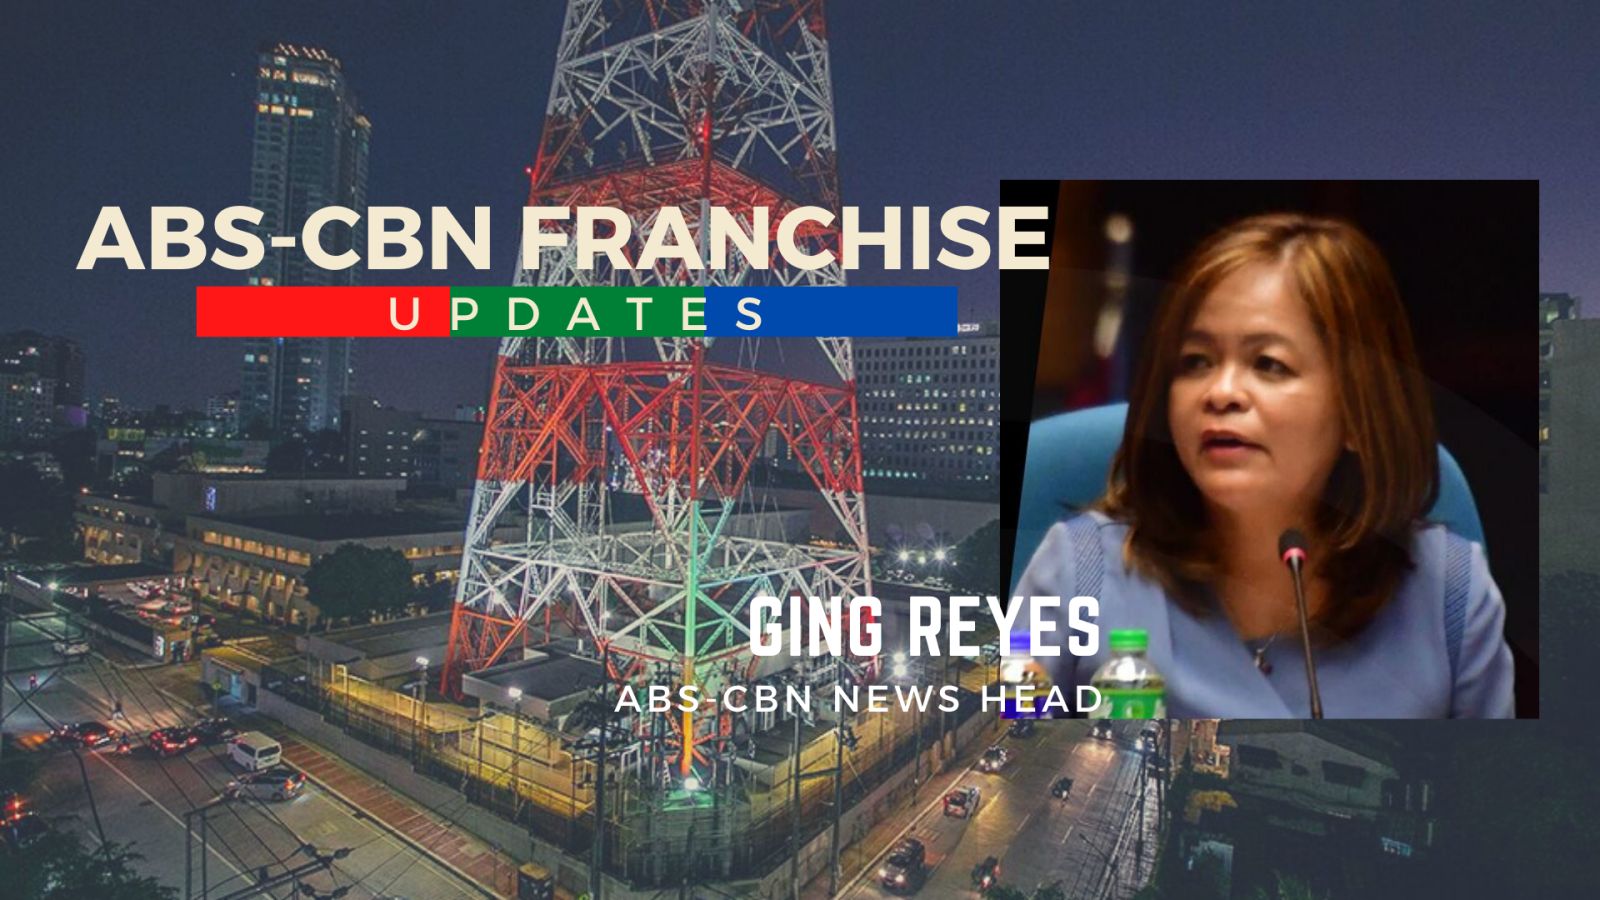 Journalism is a public service, says ABS-CBN News chief